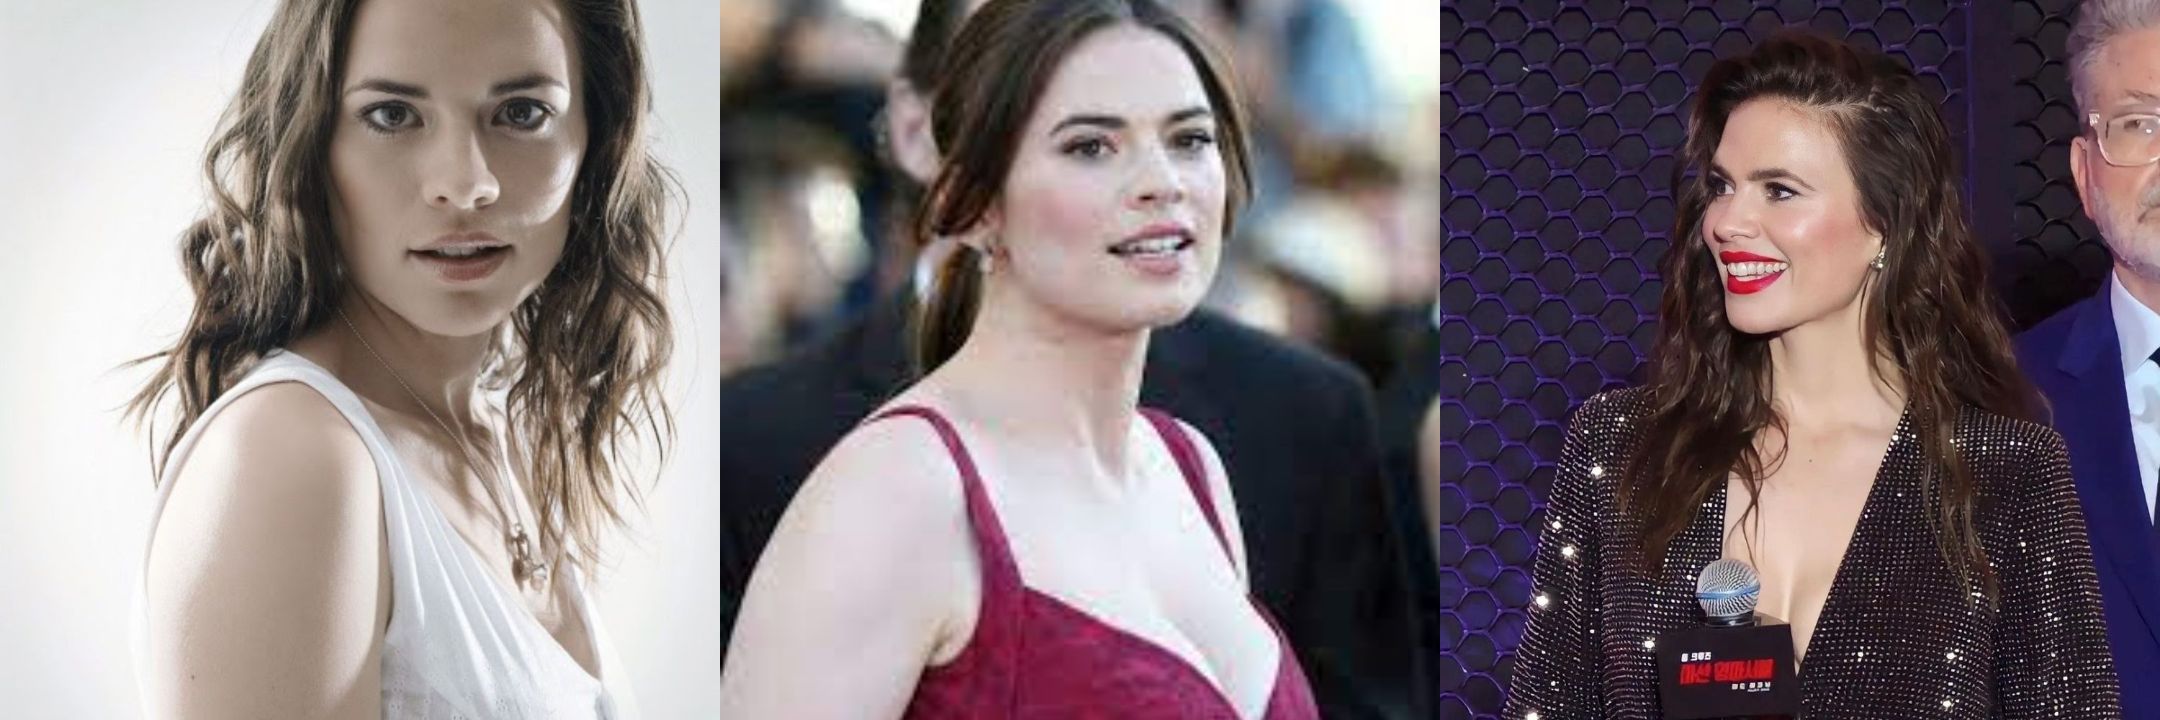 Hayley Atwell's pictures of before breast enlargement and after reduction. celebsindepth.com